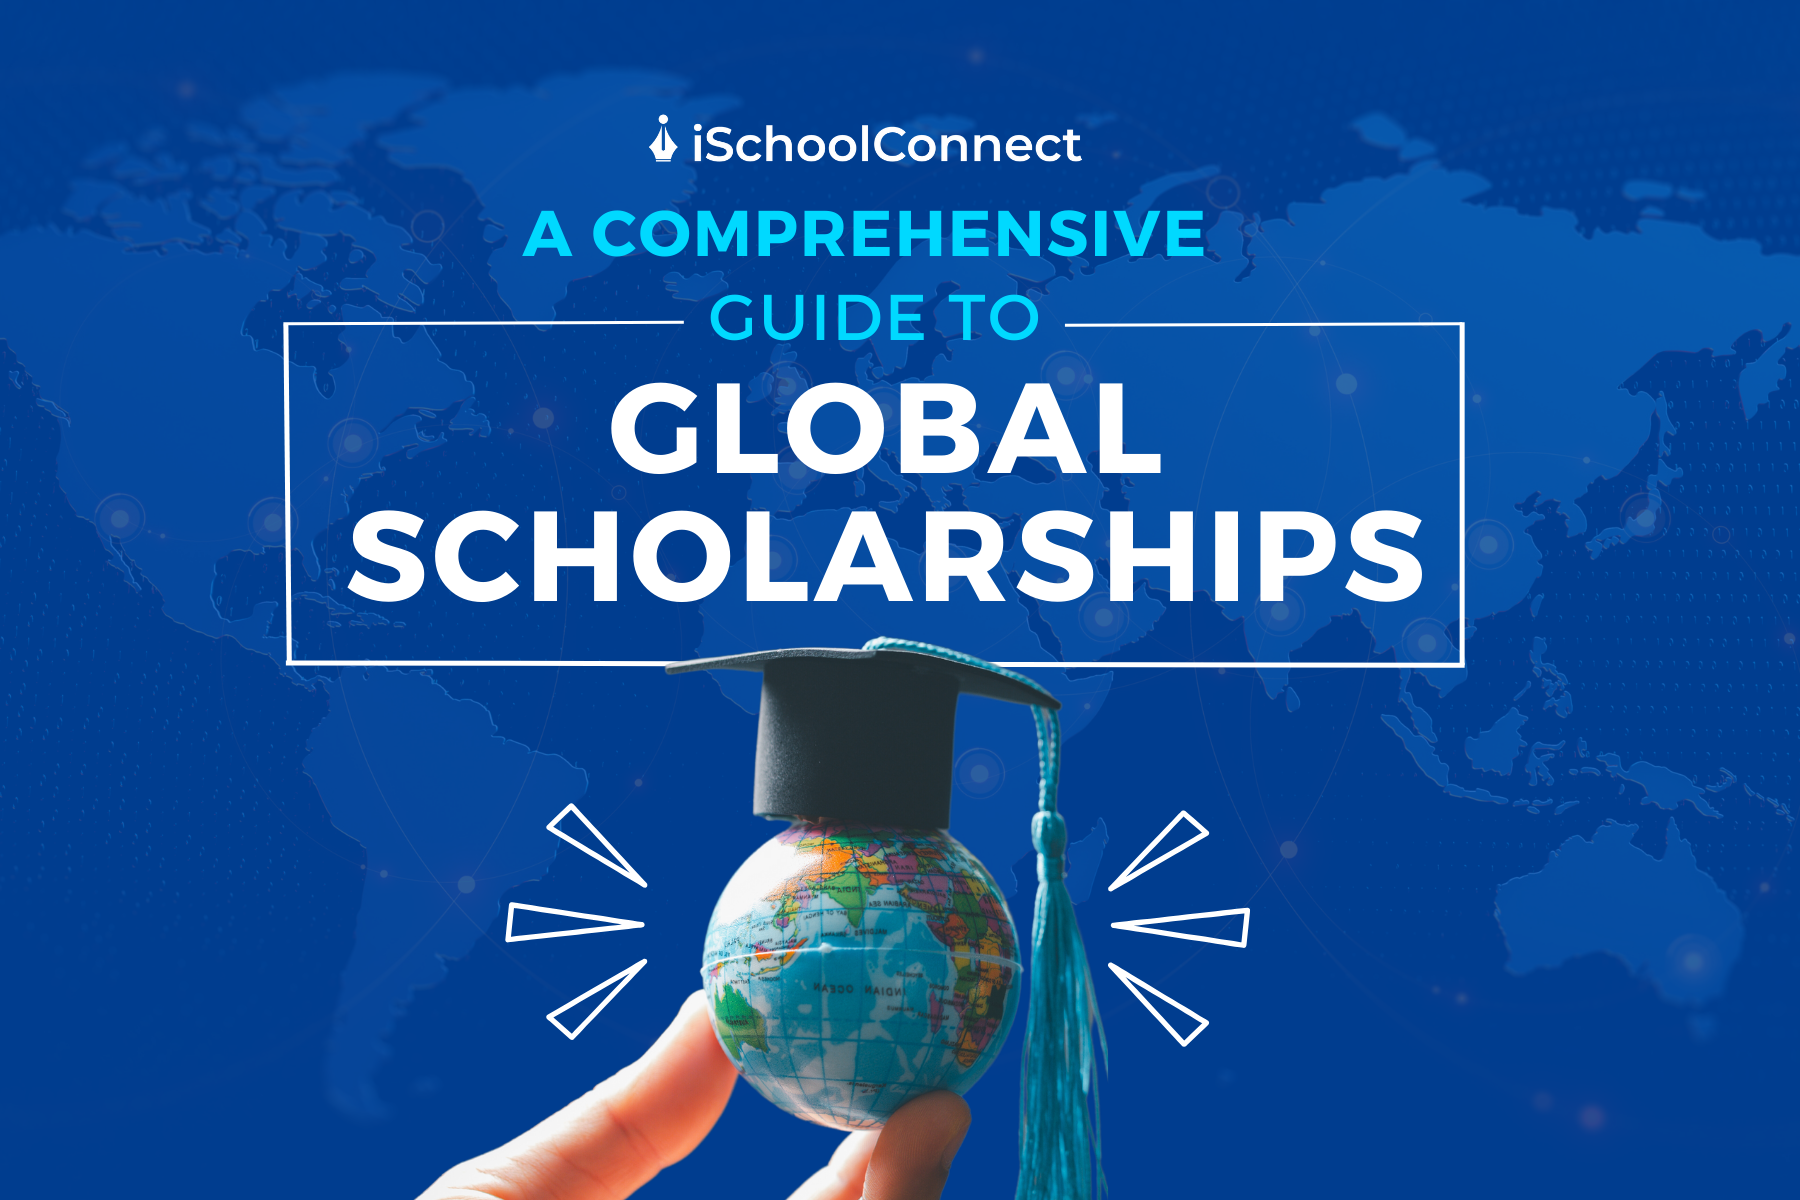 Global scholarships | A comprehensive guide